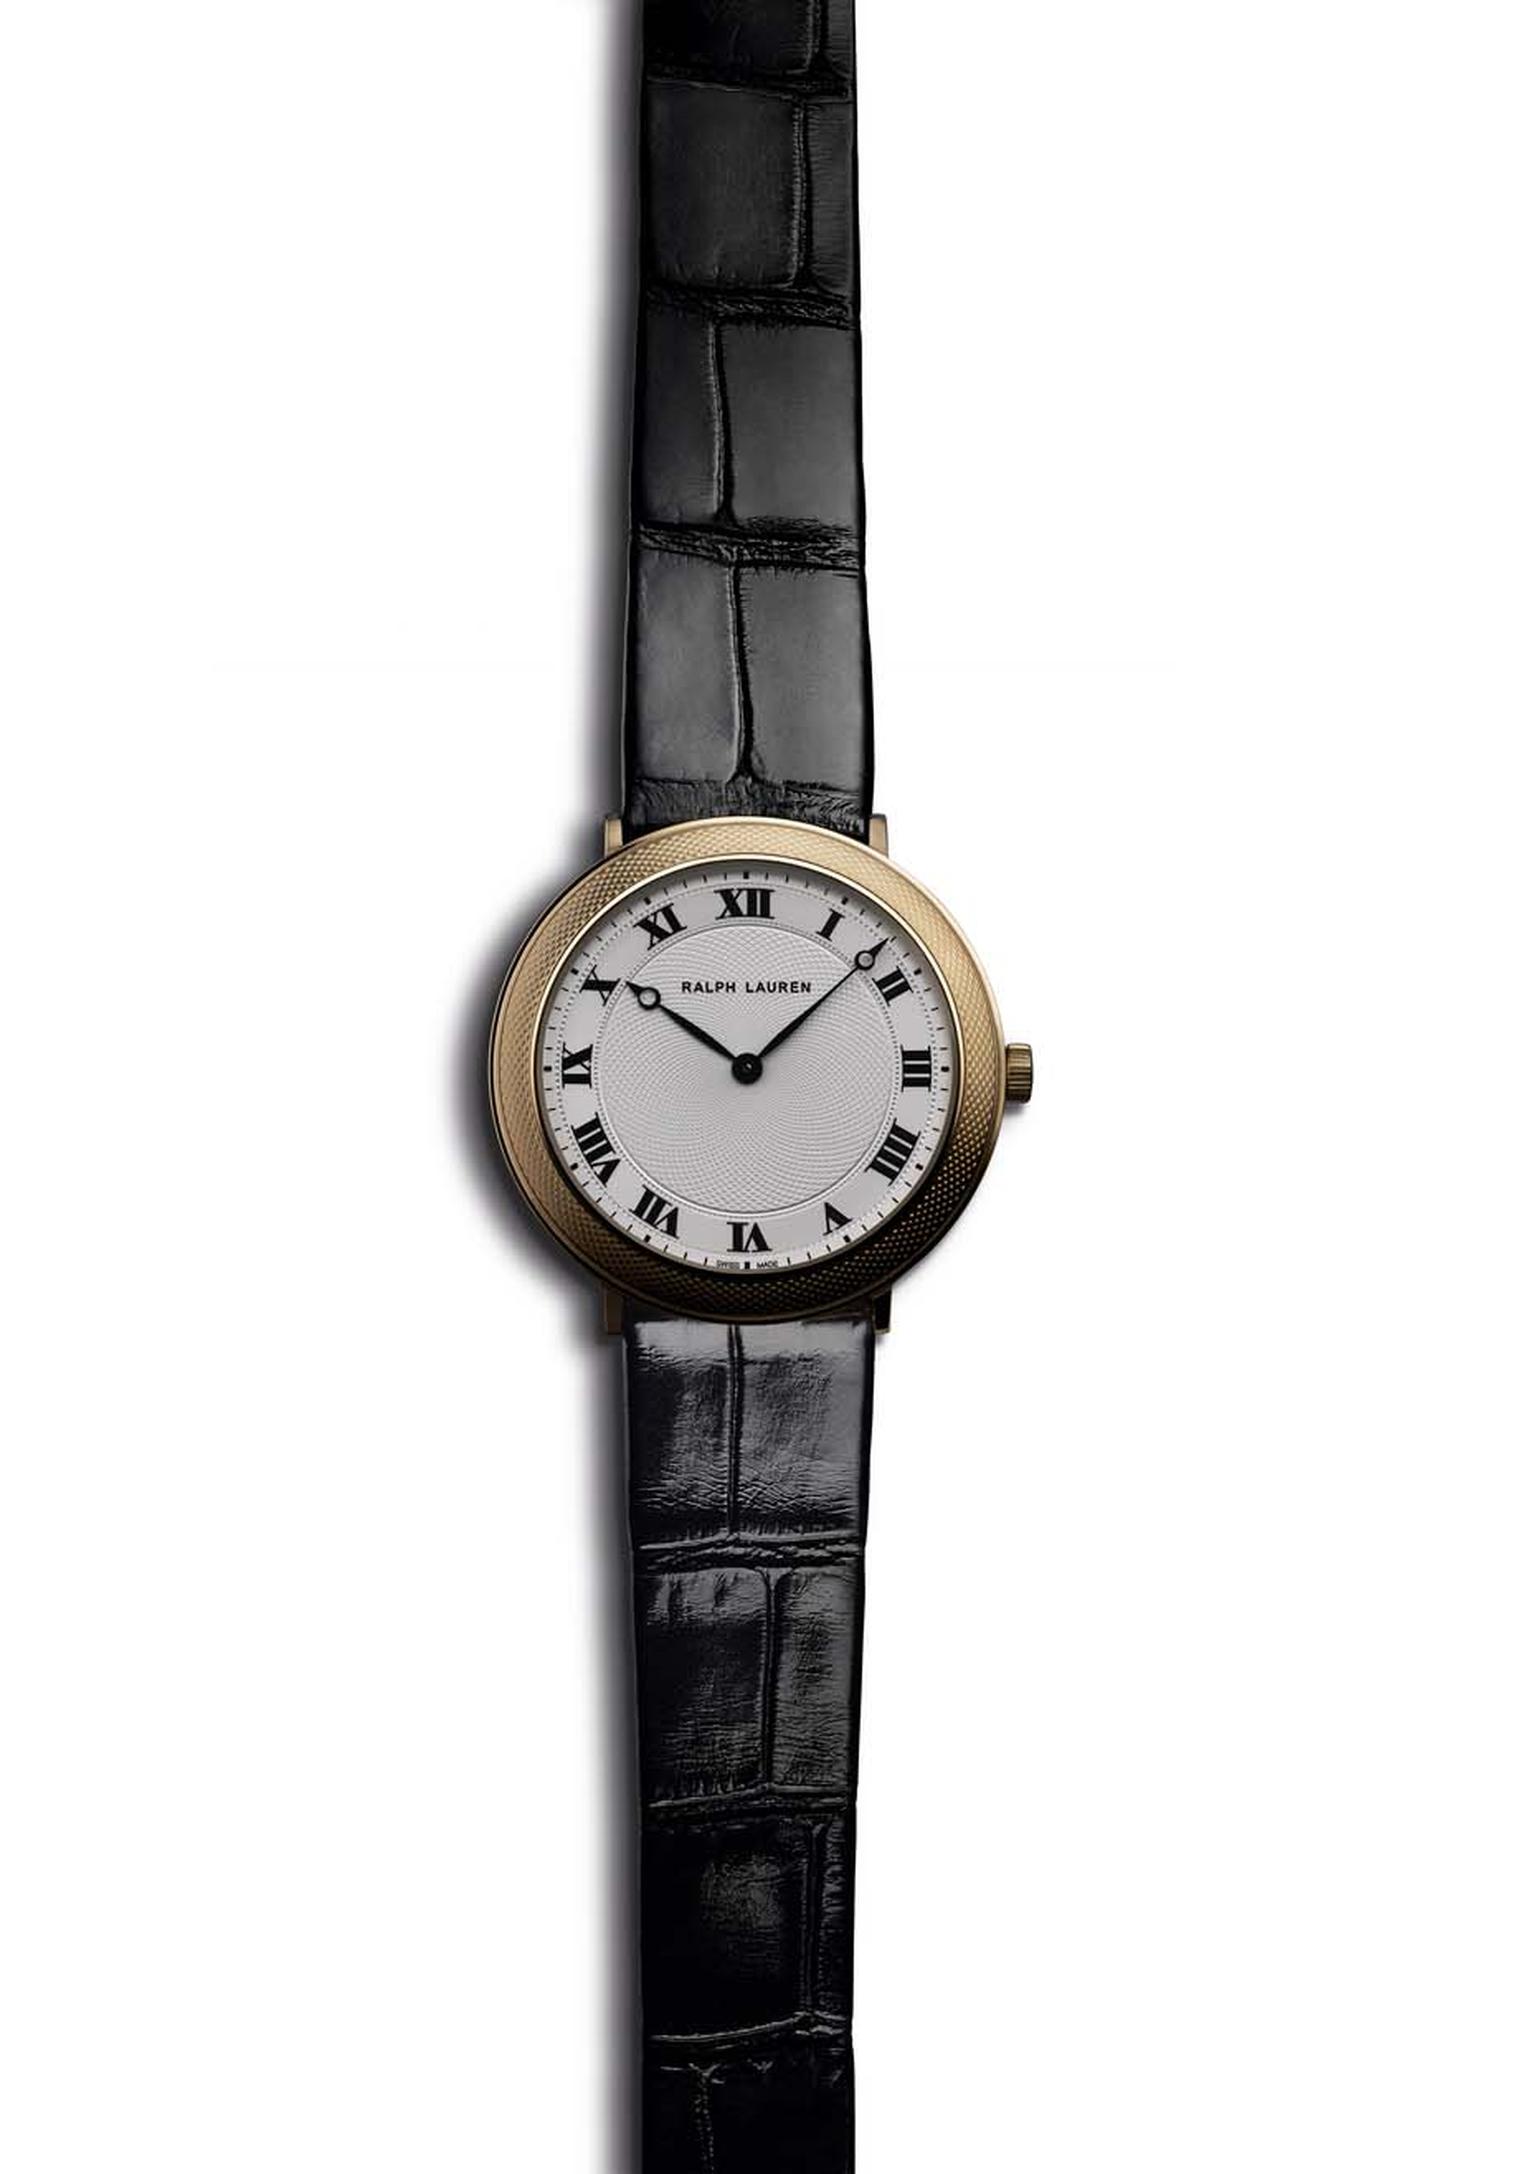 Ralph Lauren Slim Classique 32mm watch in rose gold, decorated on the bezel with guilloché engraving